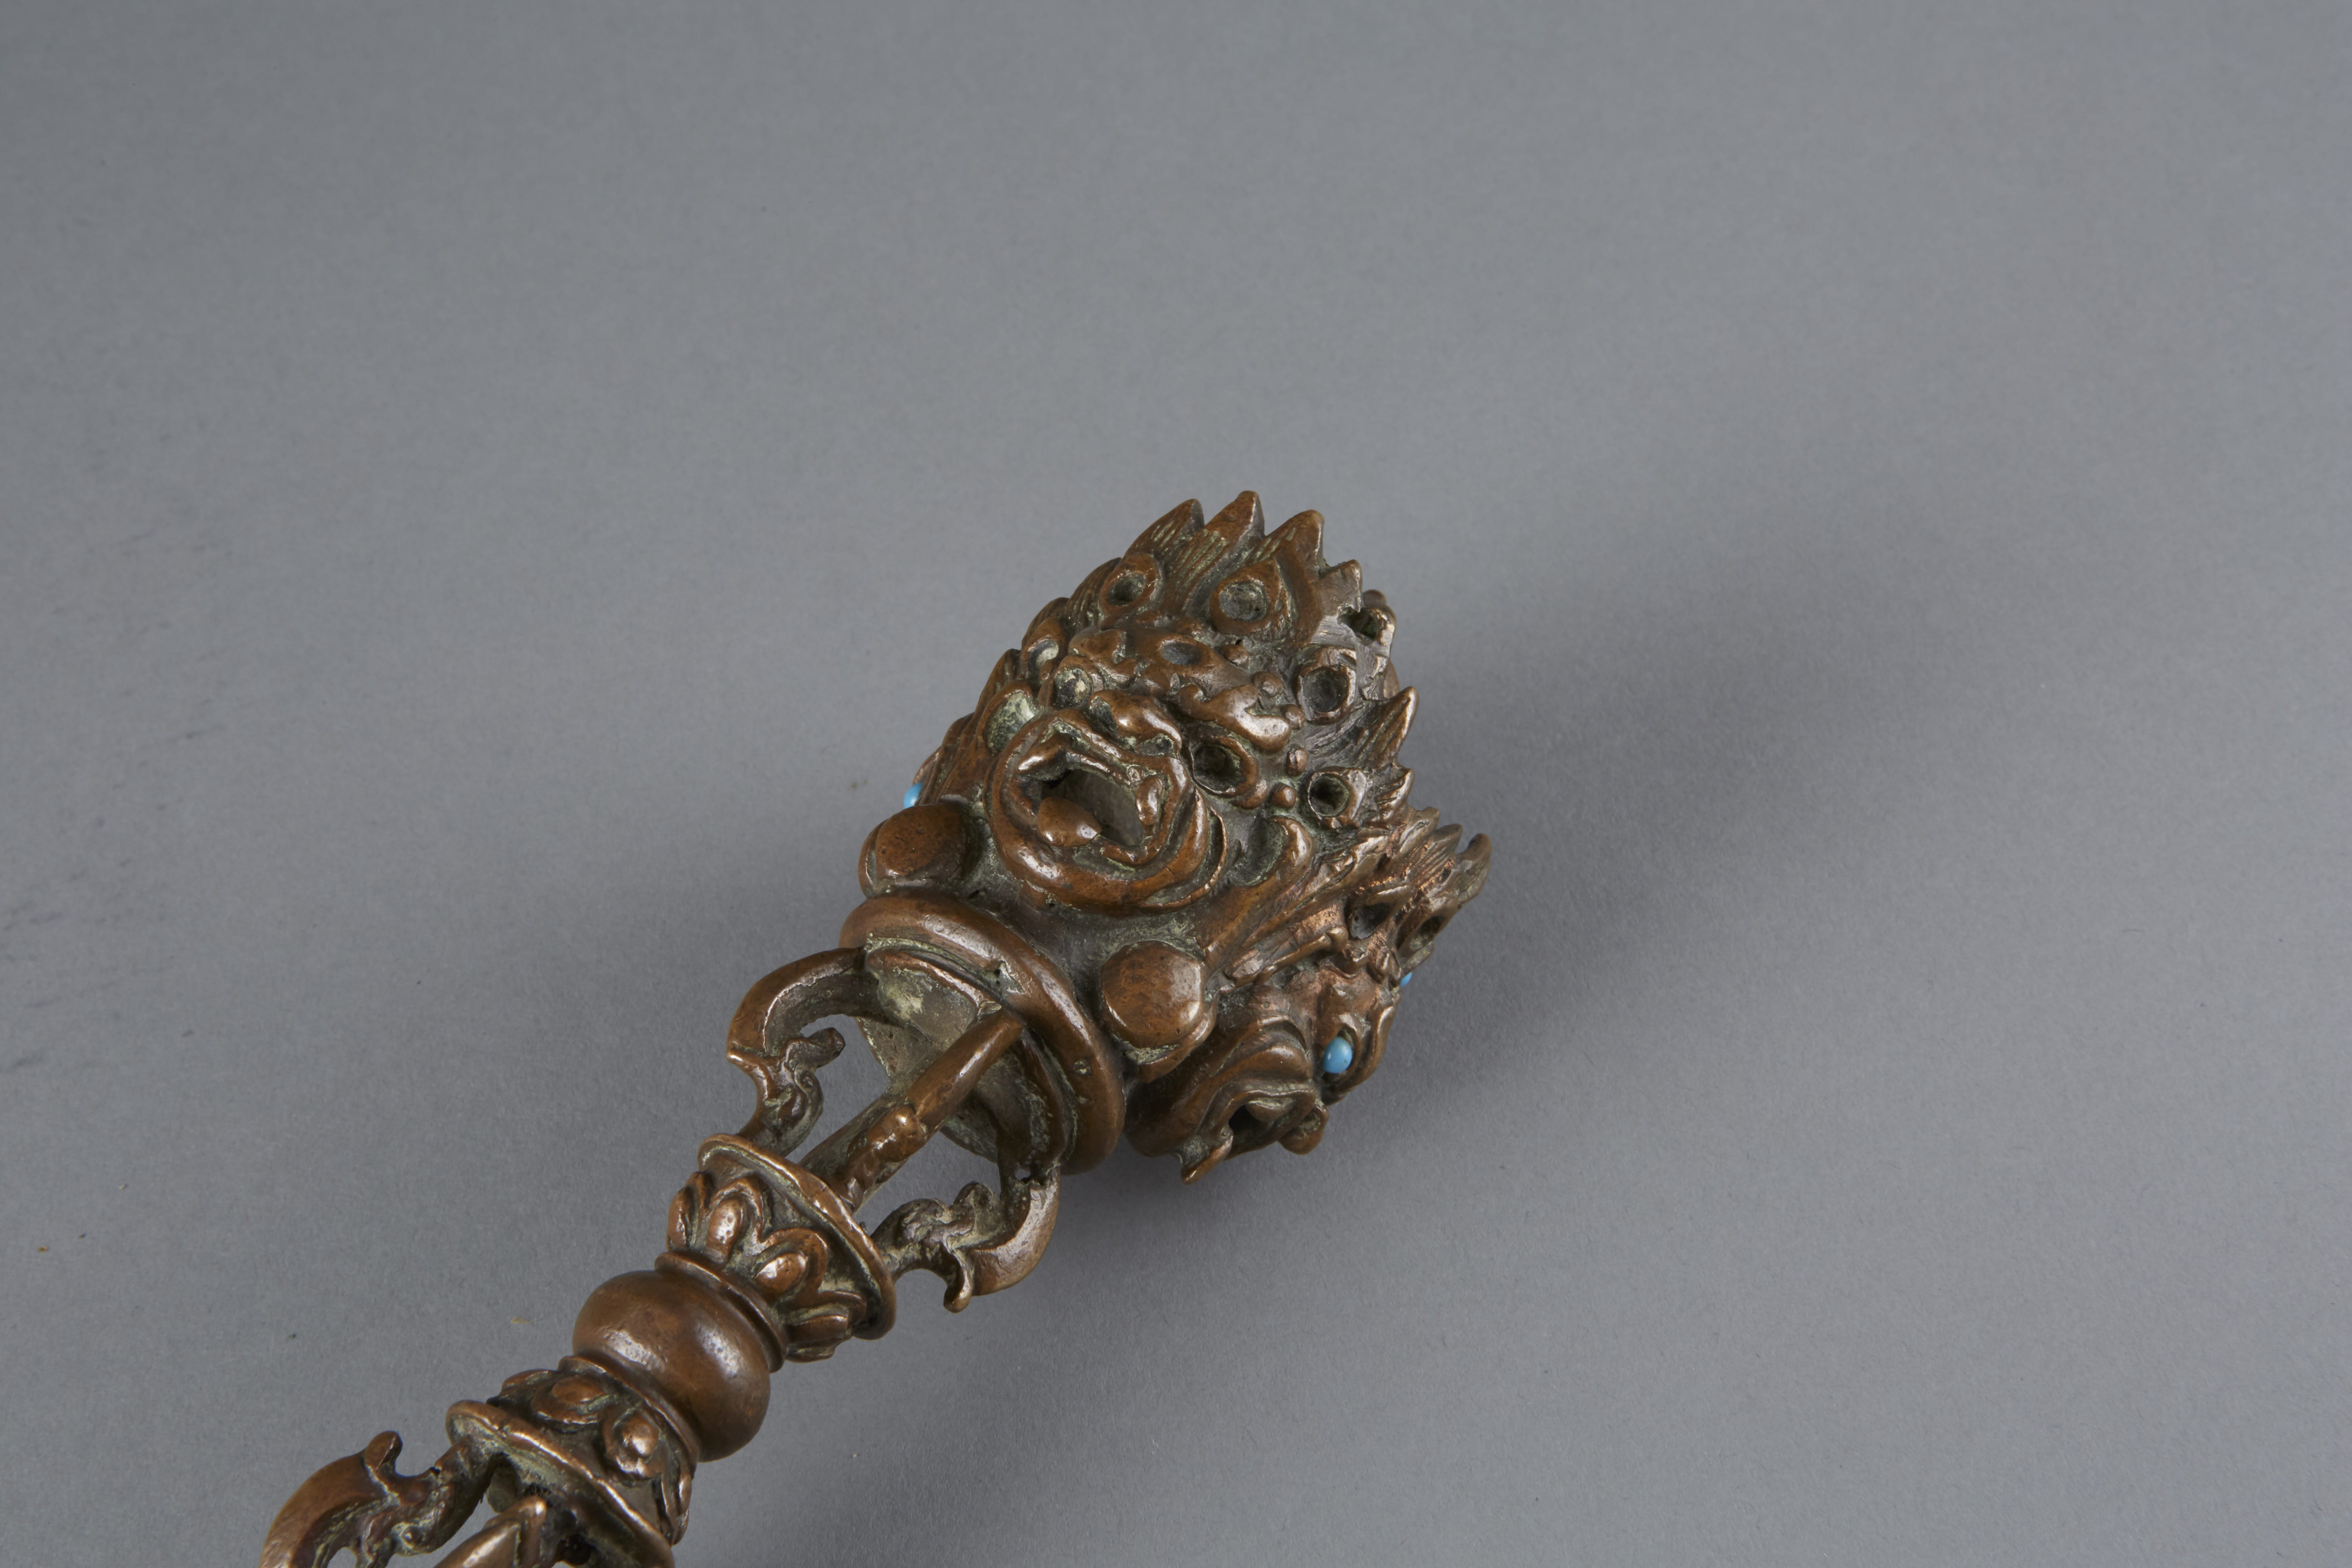 Lot 011: 18th Century Tibetan Bronze and Copper Phurba Inlaid with Turquoise